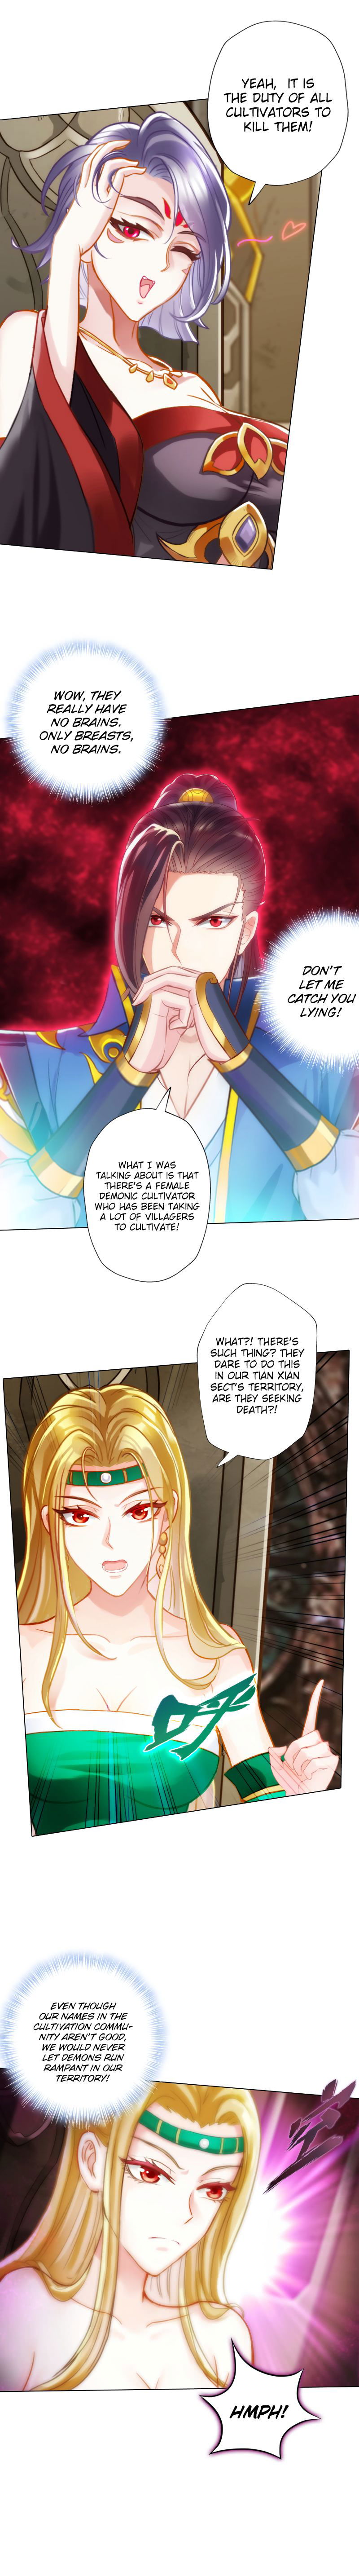 Lang Huan Library Chapter 47 page 10